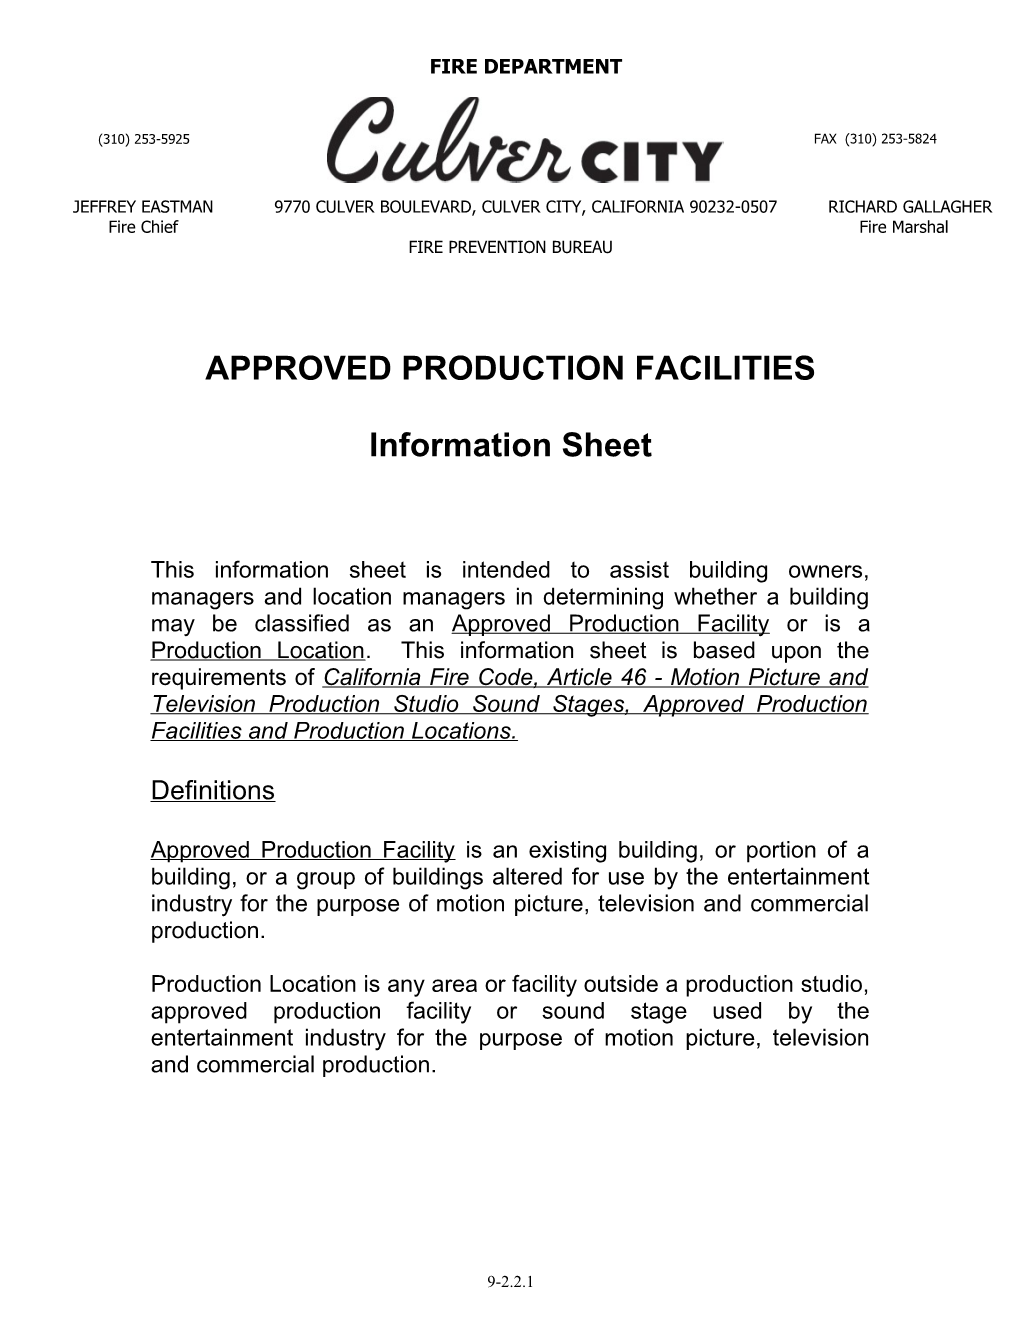 Approved Production Facilities